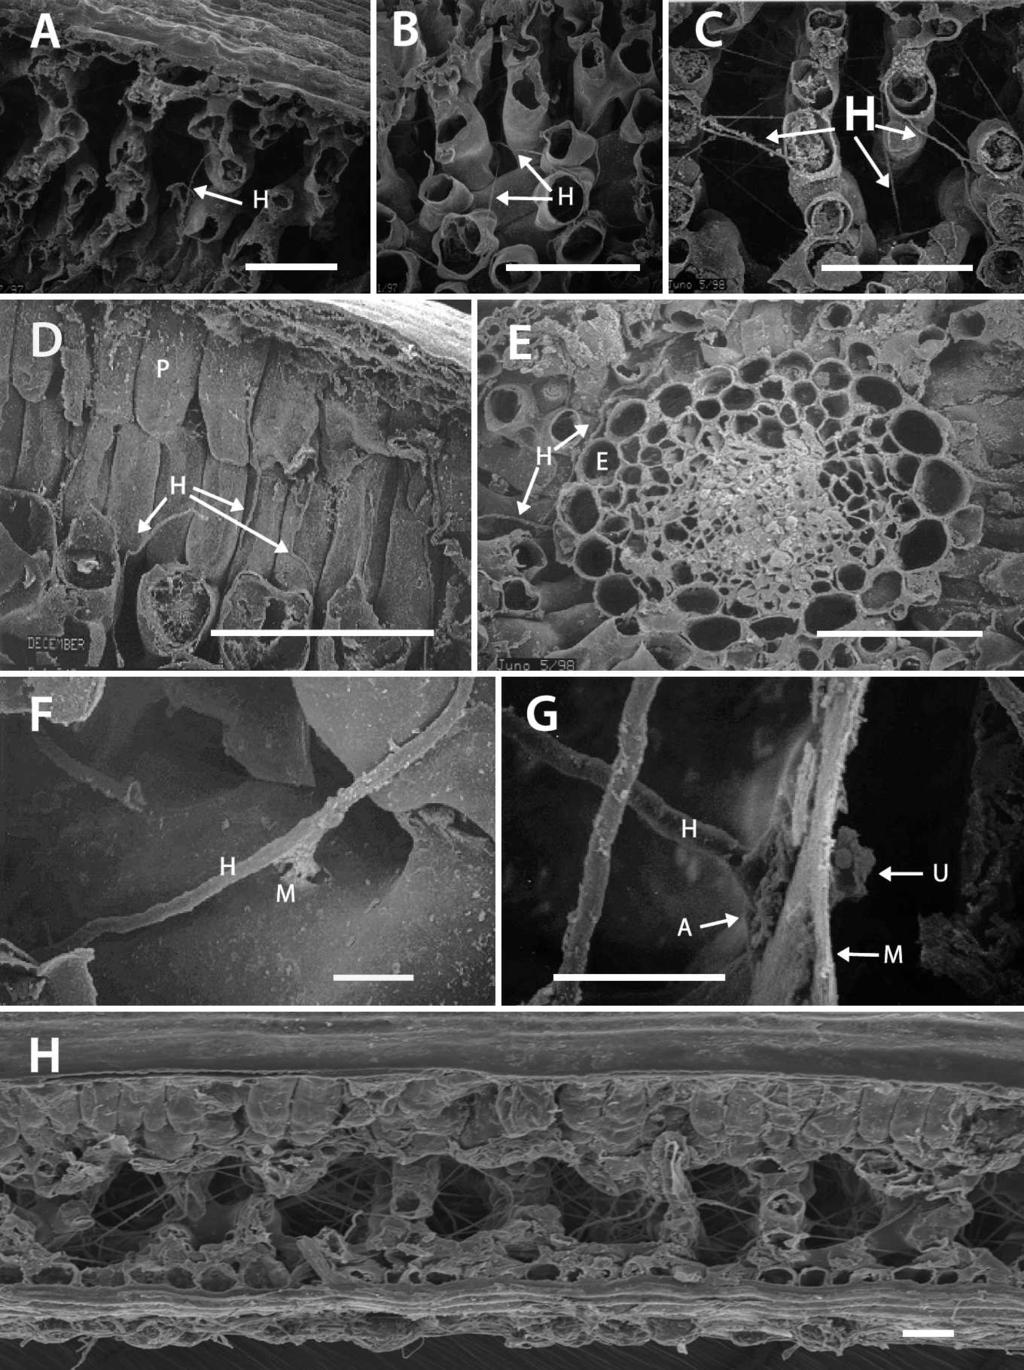 438 MYCOLOGIA FIG. 5. Scanning electron micrographs of internal needle colonization. A C. Progress of colonization 1 11 mo after exposure to inoculum. A. Colonization at 1 mo, few hyphae (H) are visible.